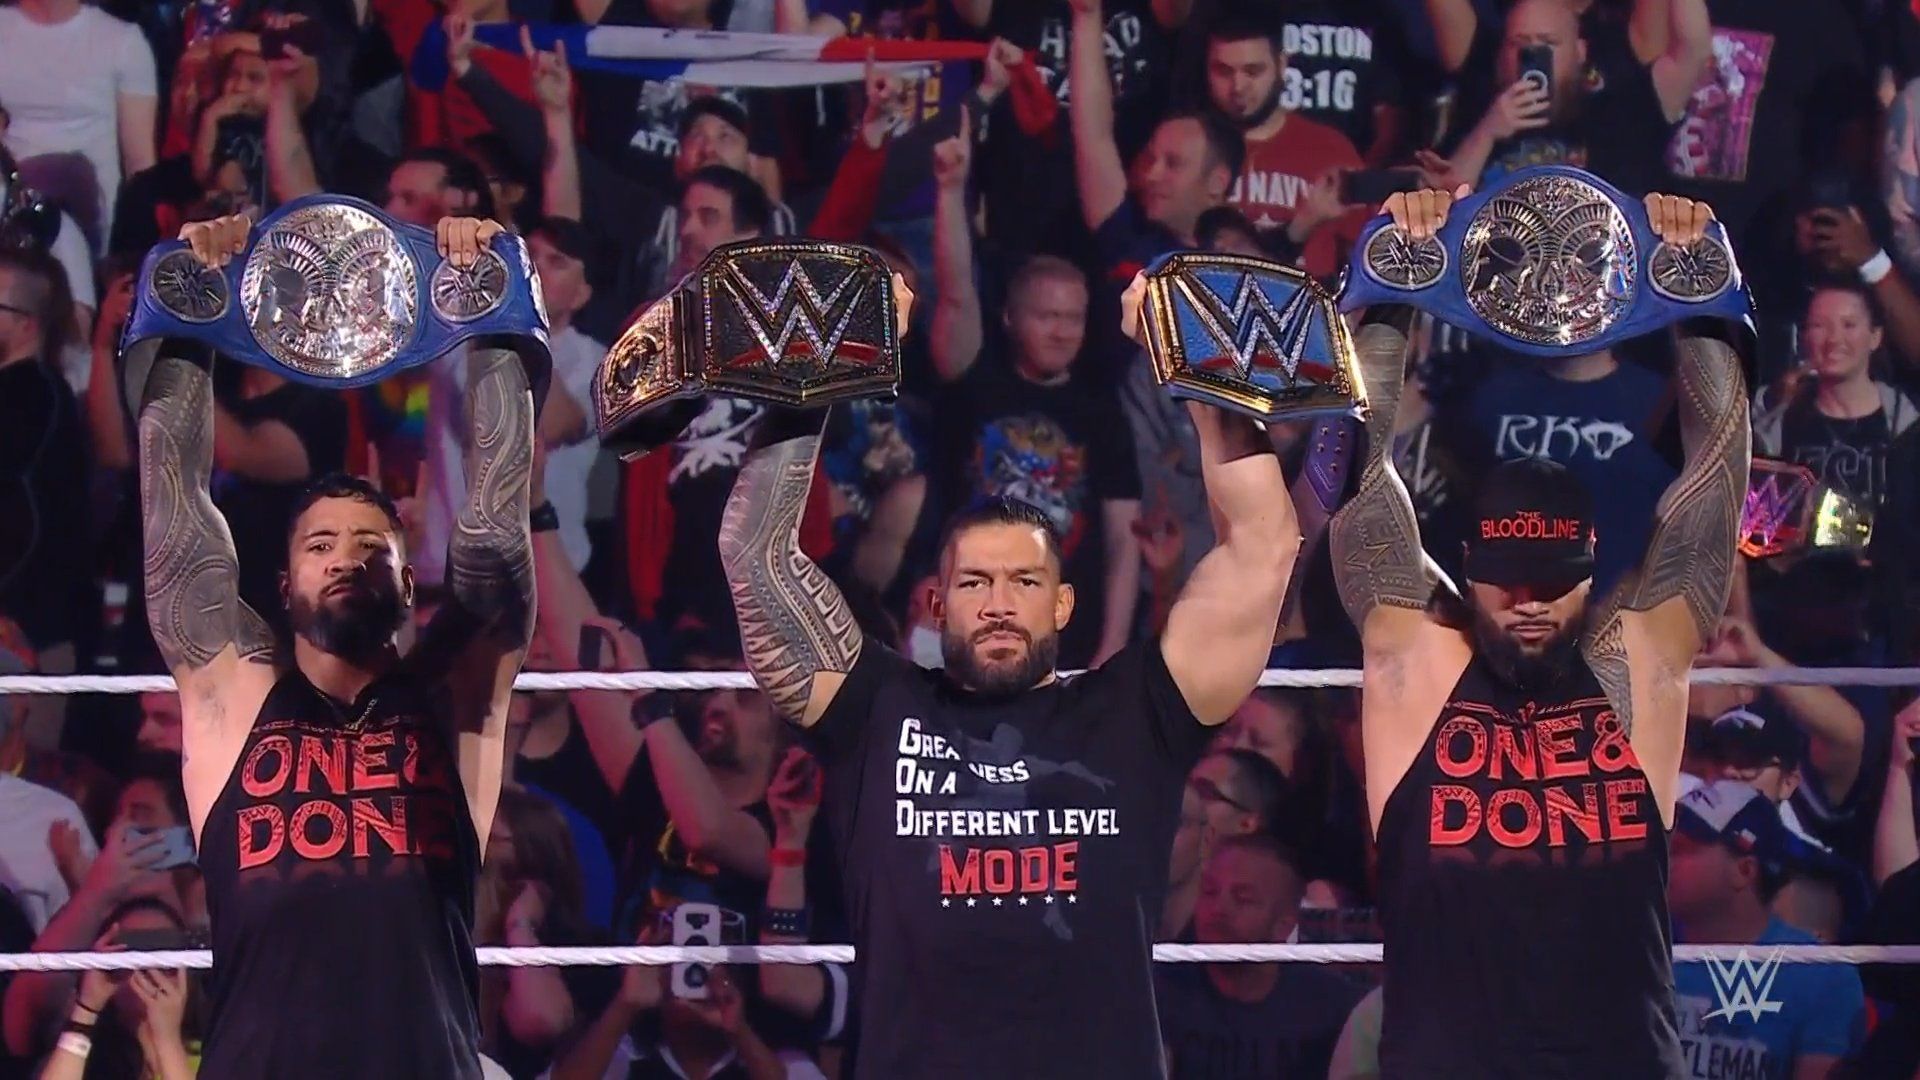 The Usos will attempt to unify the tag titles at WrestleMania Backlash.